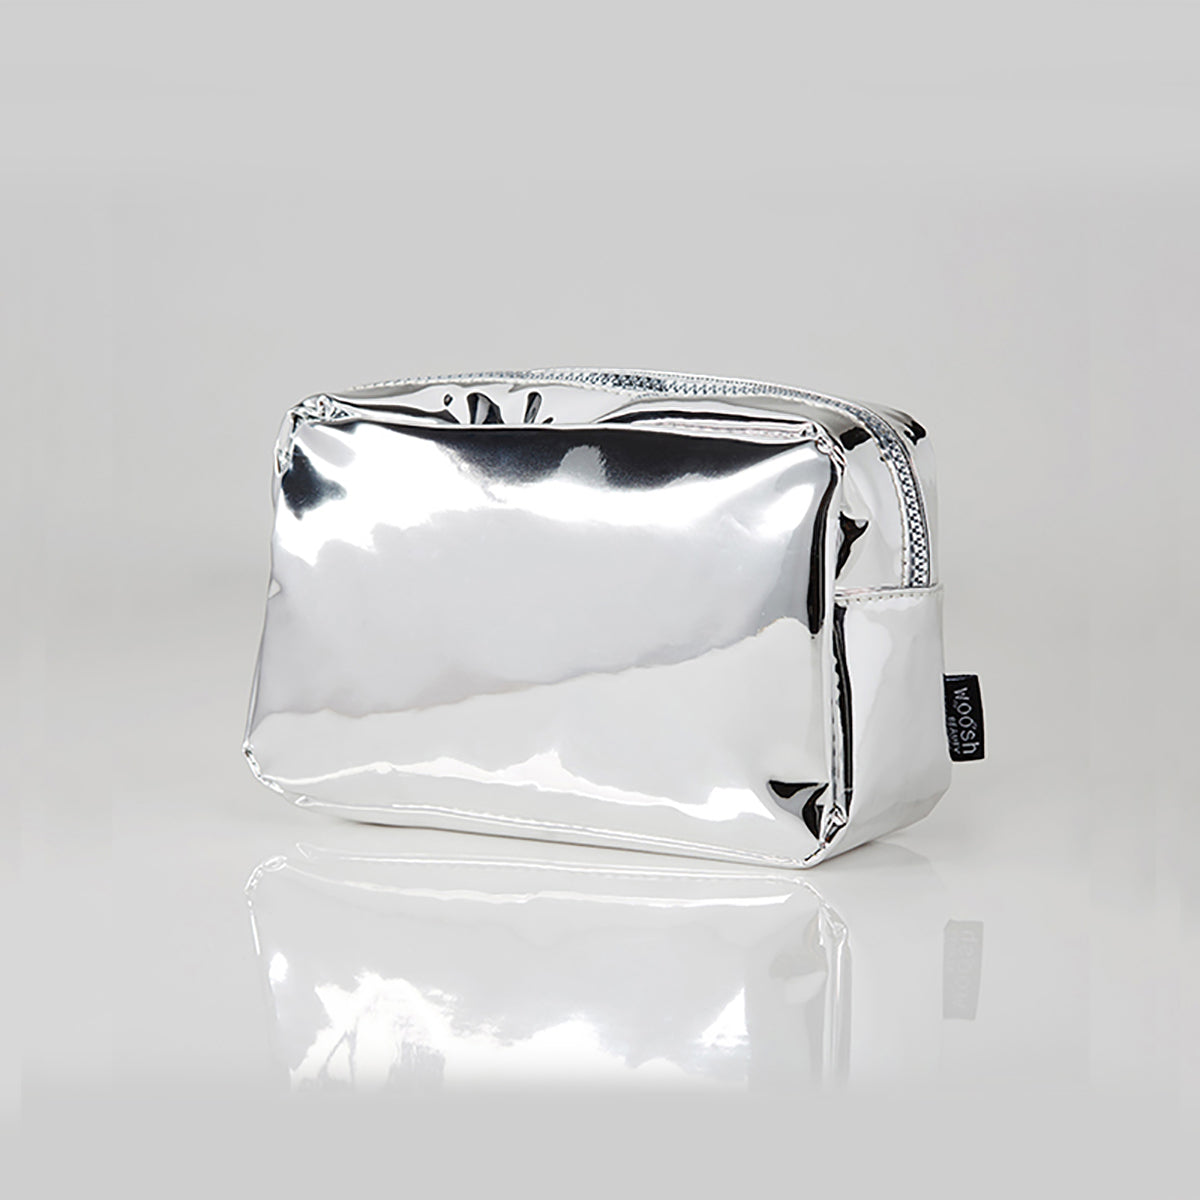 Angled view of the Woosh Beauty silver essential medium makeup bag